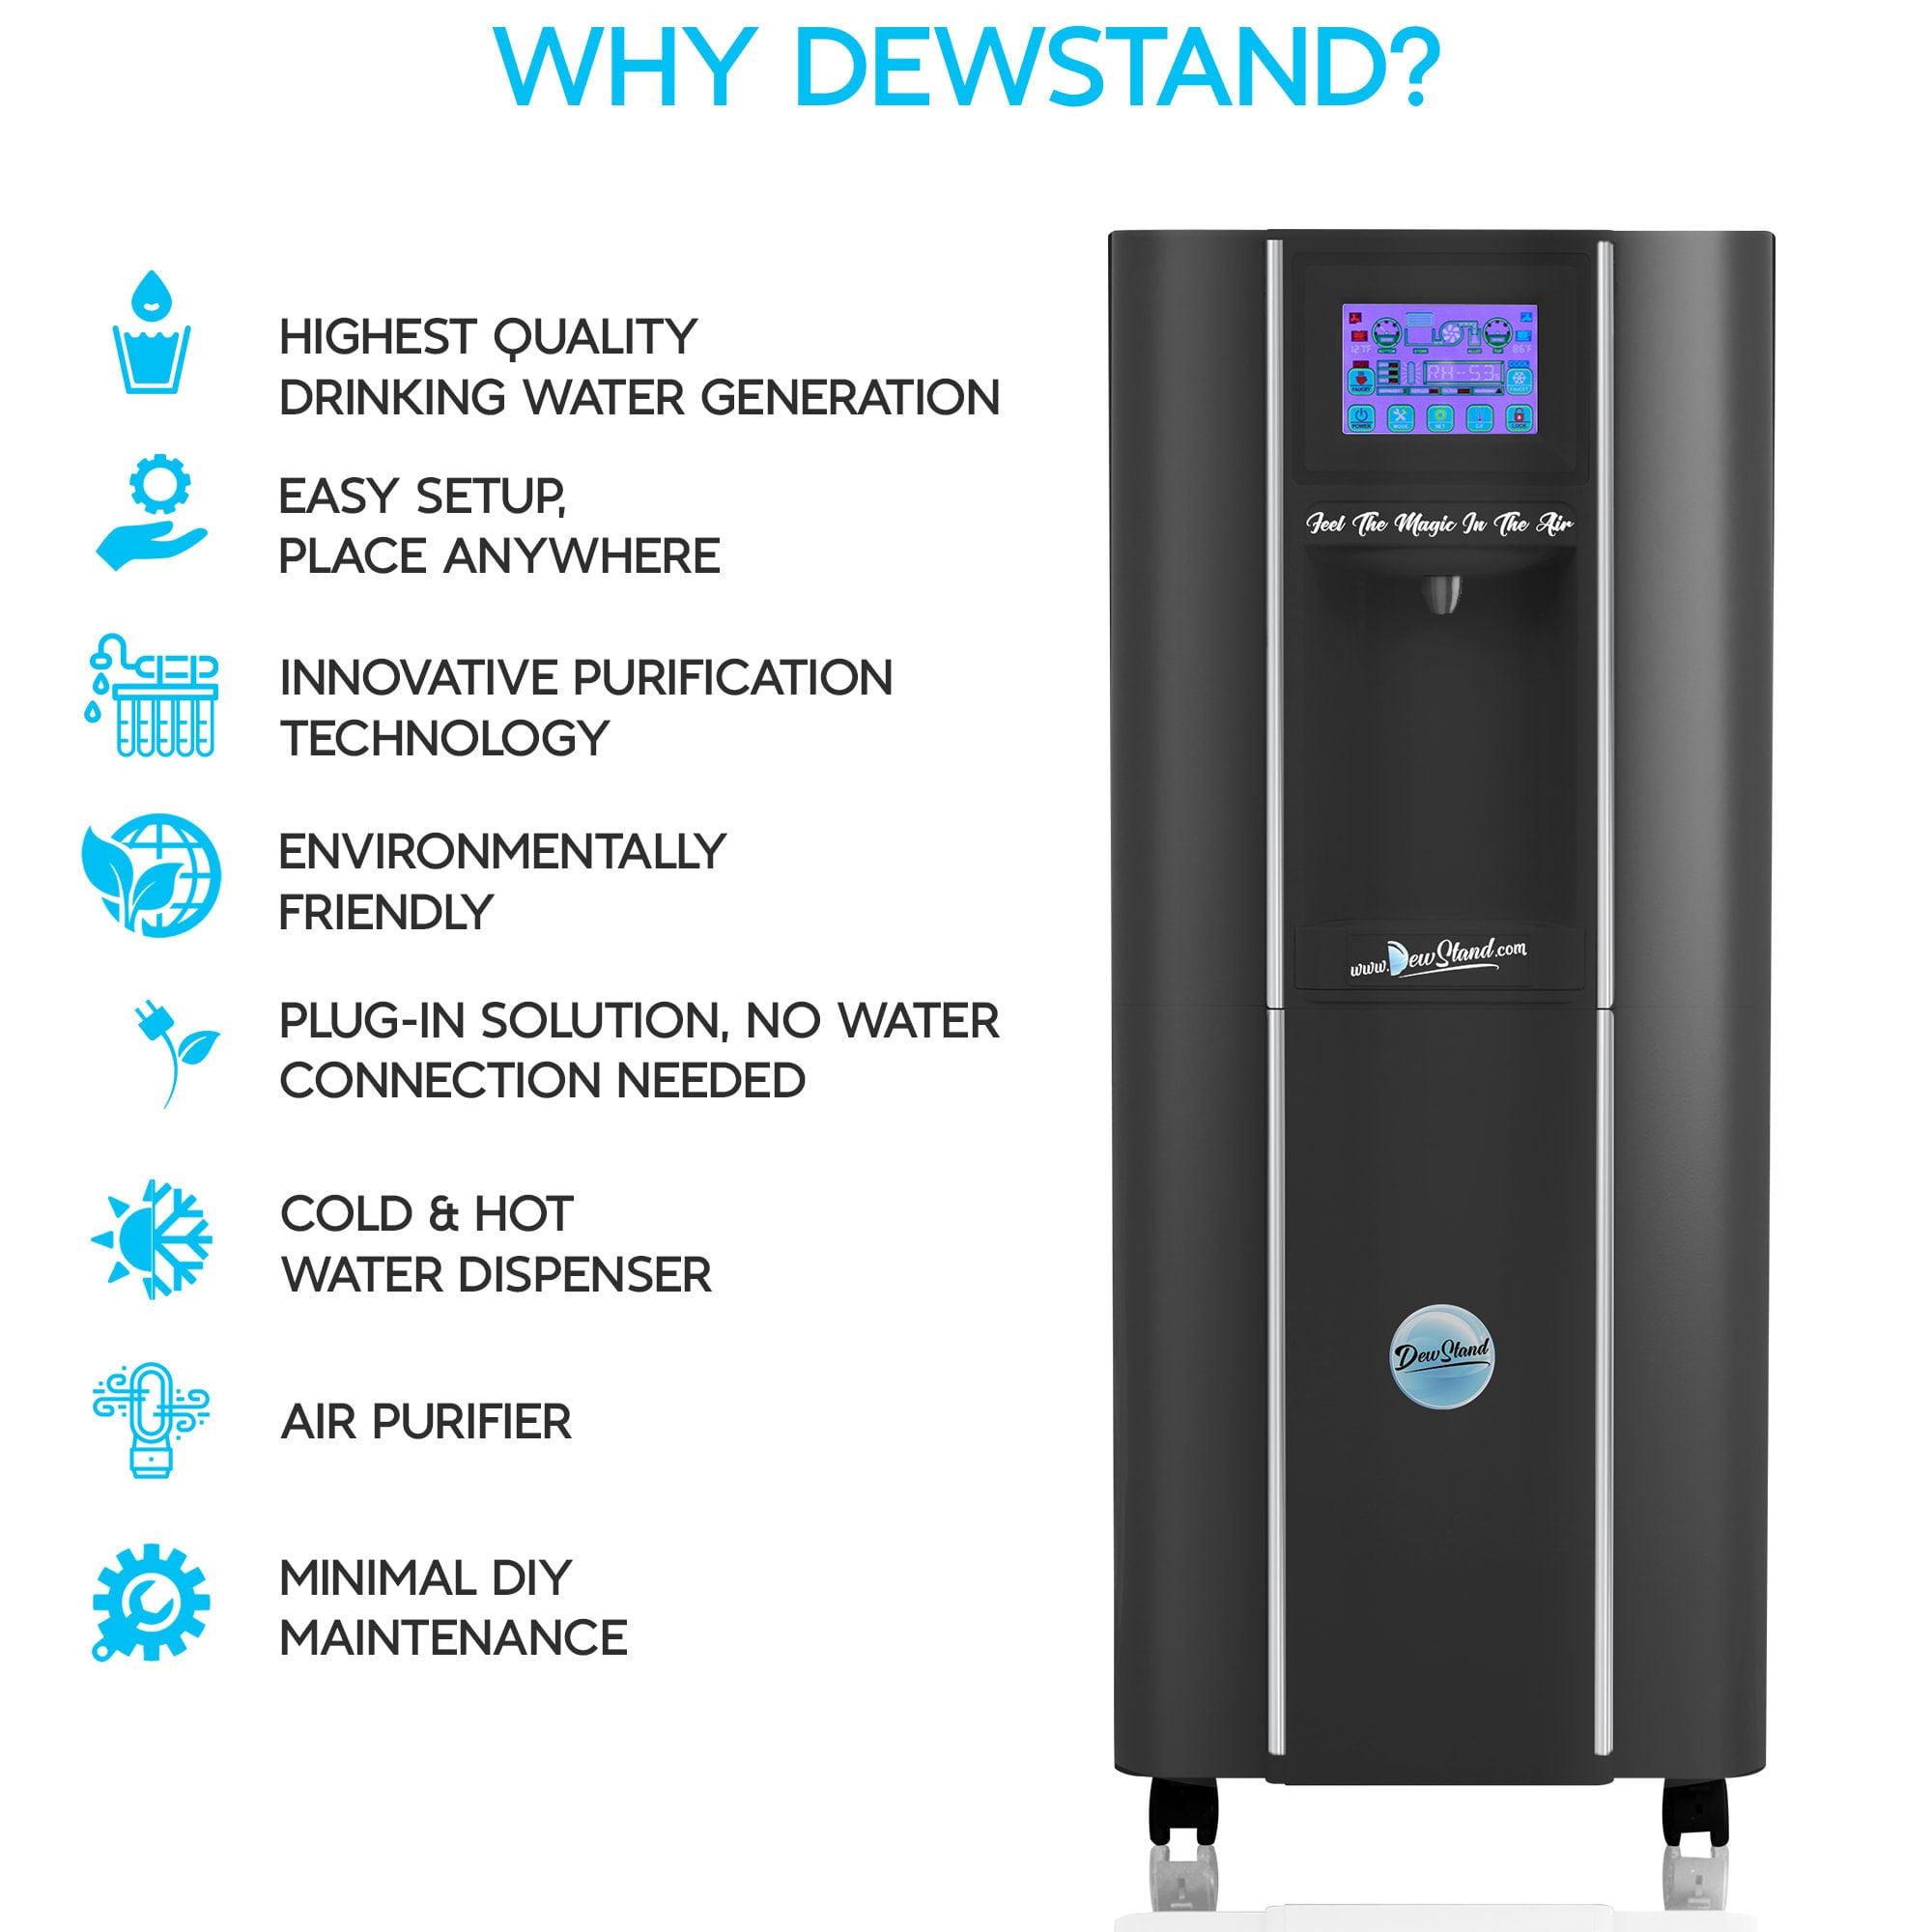 The Dewstand Futuristic Water Cooler – Get This Installed Today